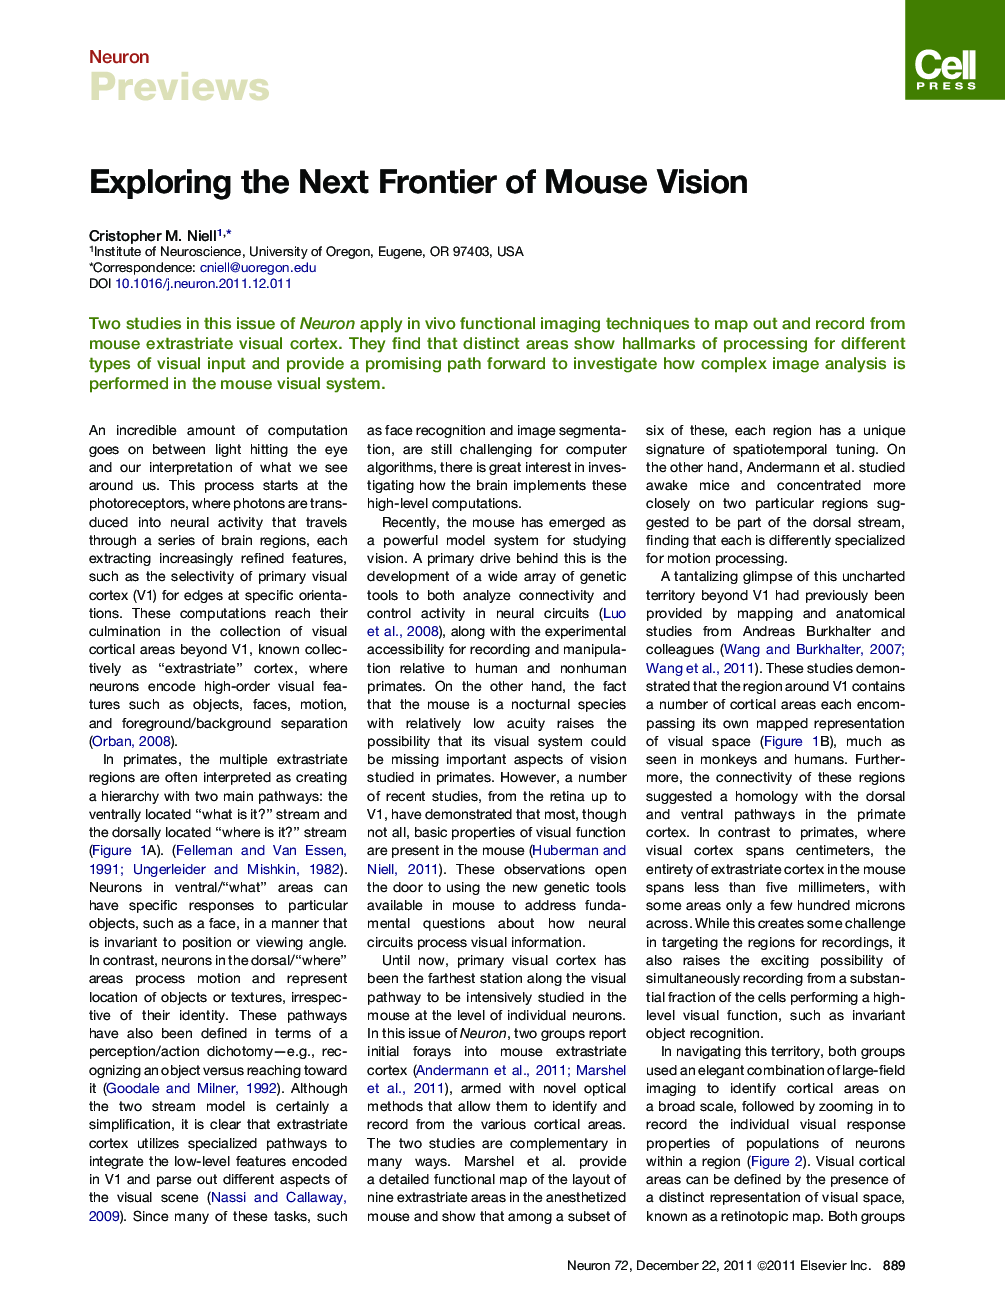 Exploring the Next Frontier of Mouse Vision